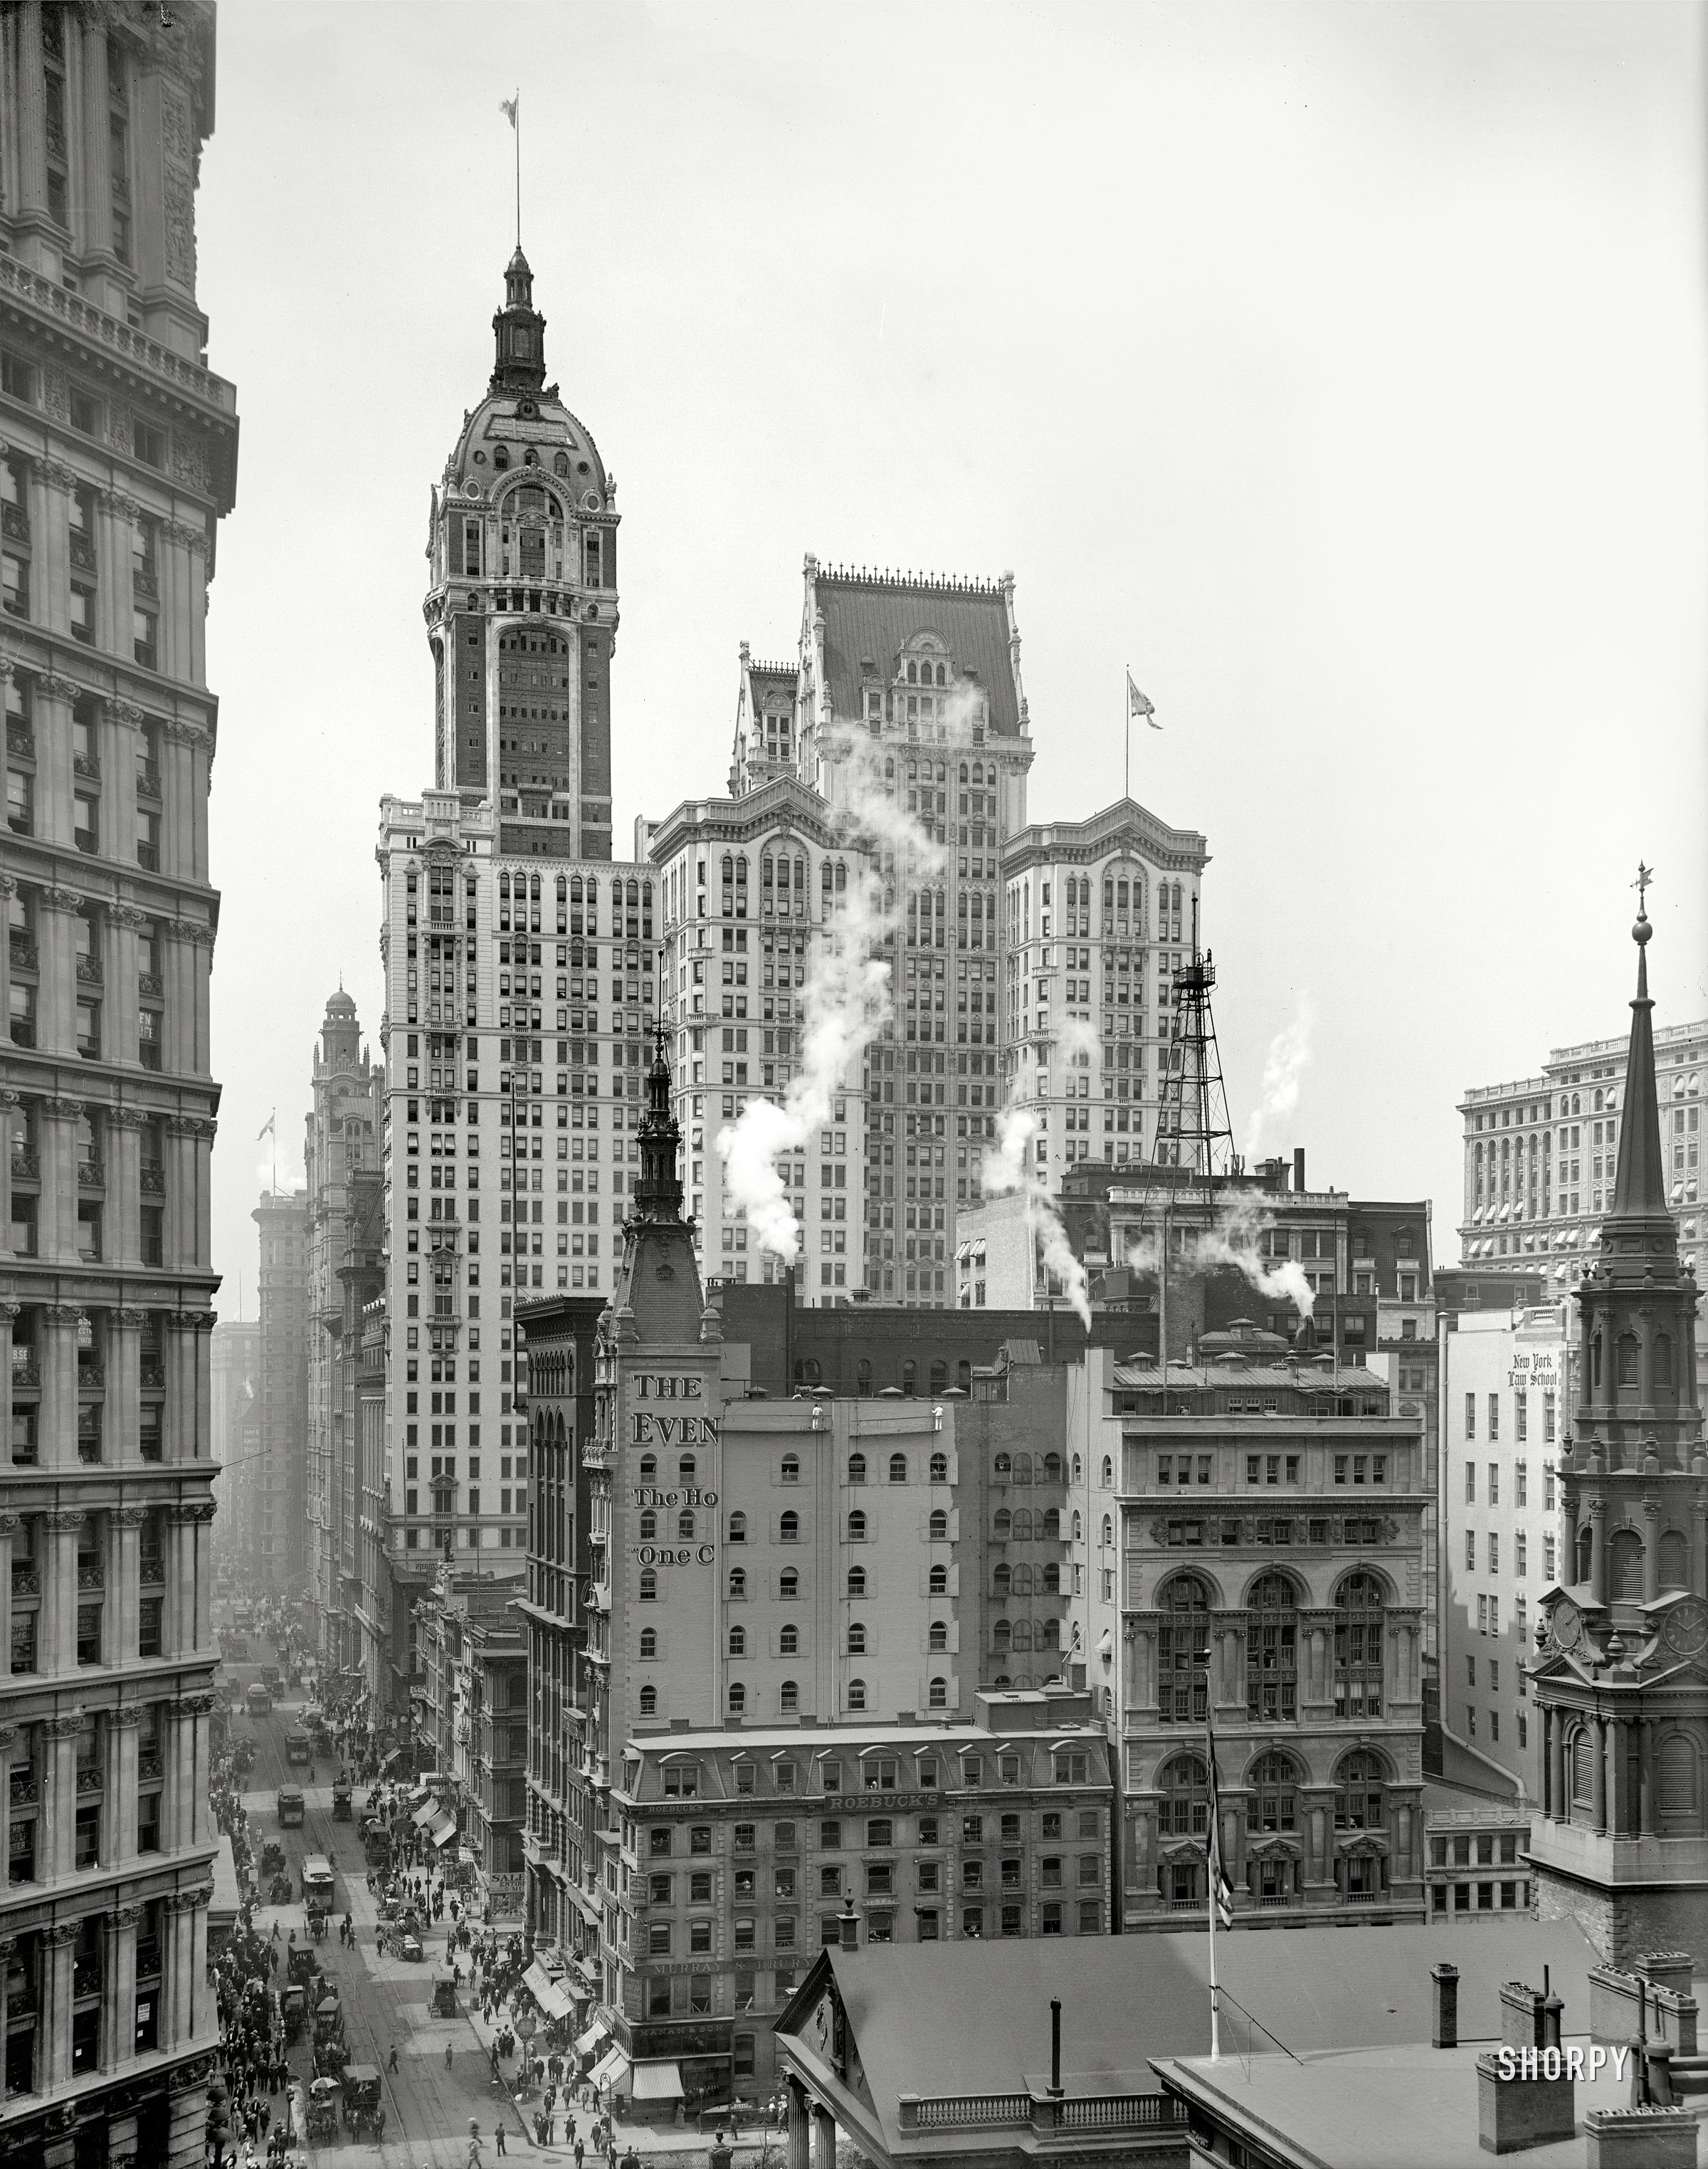 Manhattan circa 1910. "Singer Building down Broadway from the post office." 8x10 inch dry plate glass negative, Detroit Publishing Company. View full size.